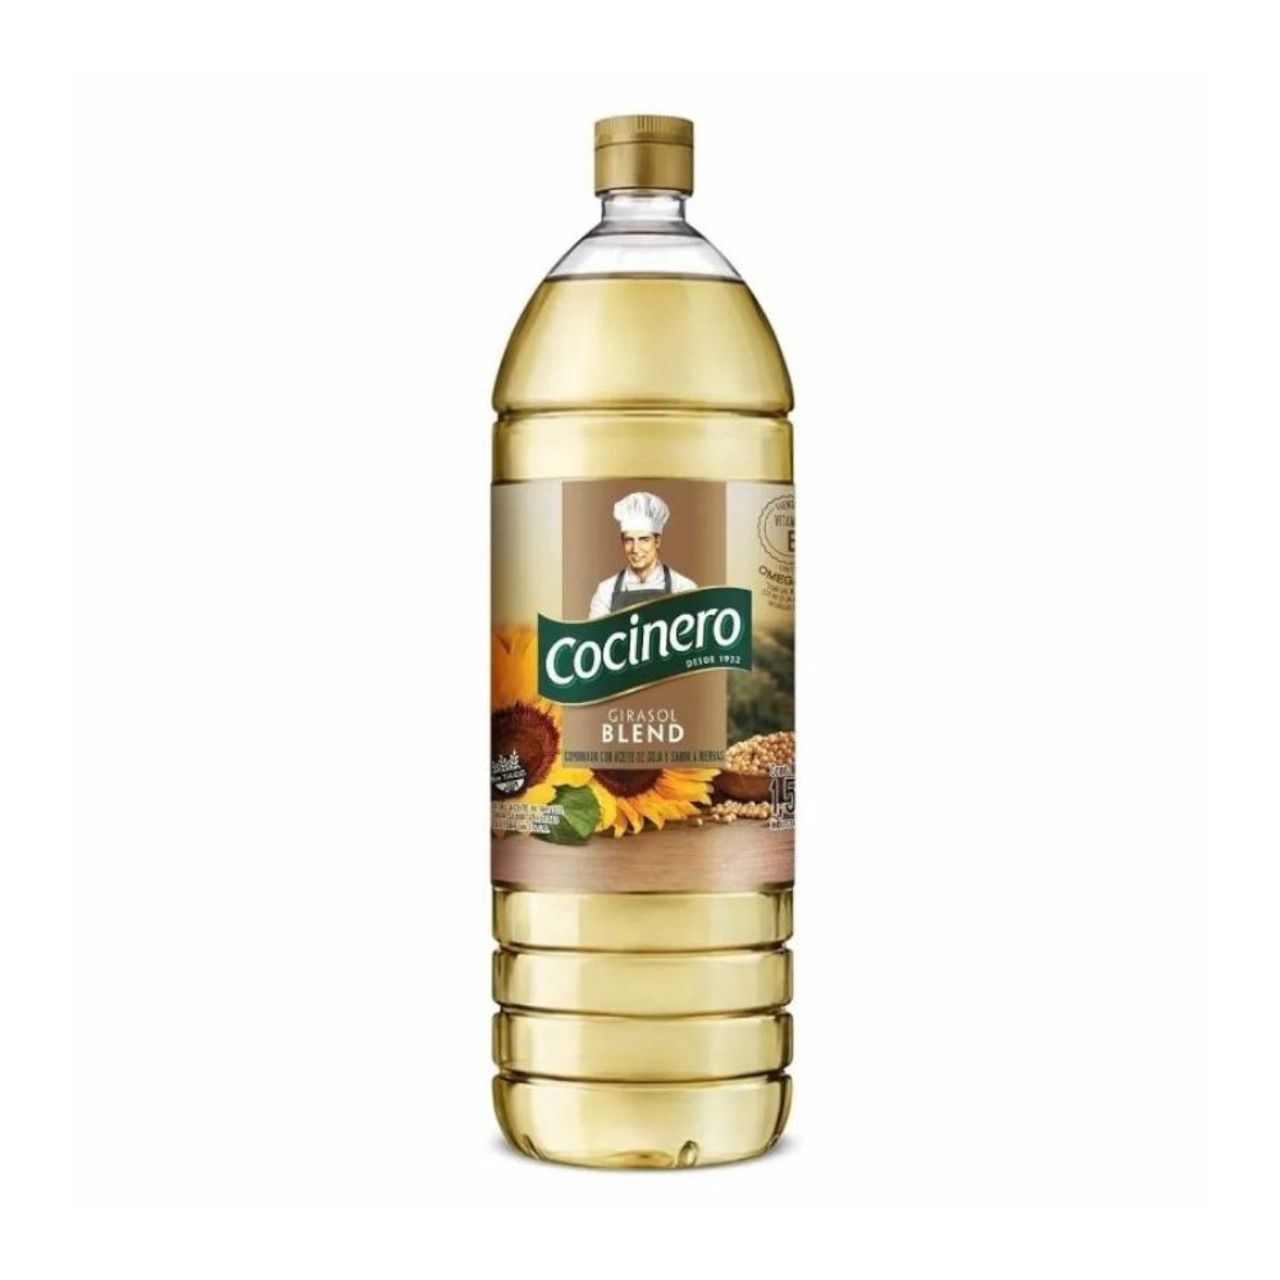 Cocinero Sunflower and Soy Blend Cooking Oil - Herb-Infused Flavor Aceite  de Girasol, 1.5 L / 50.72